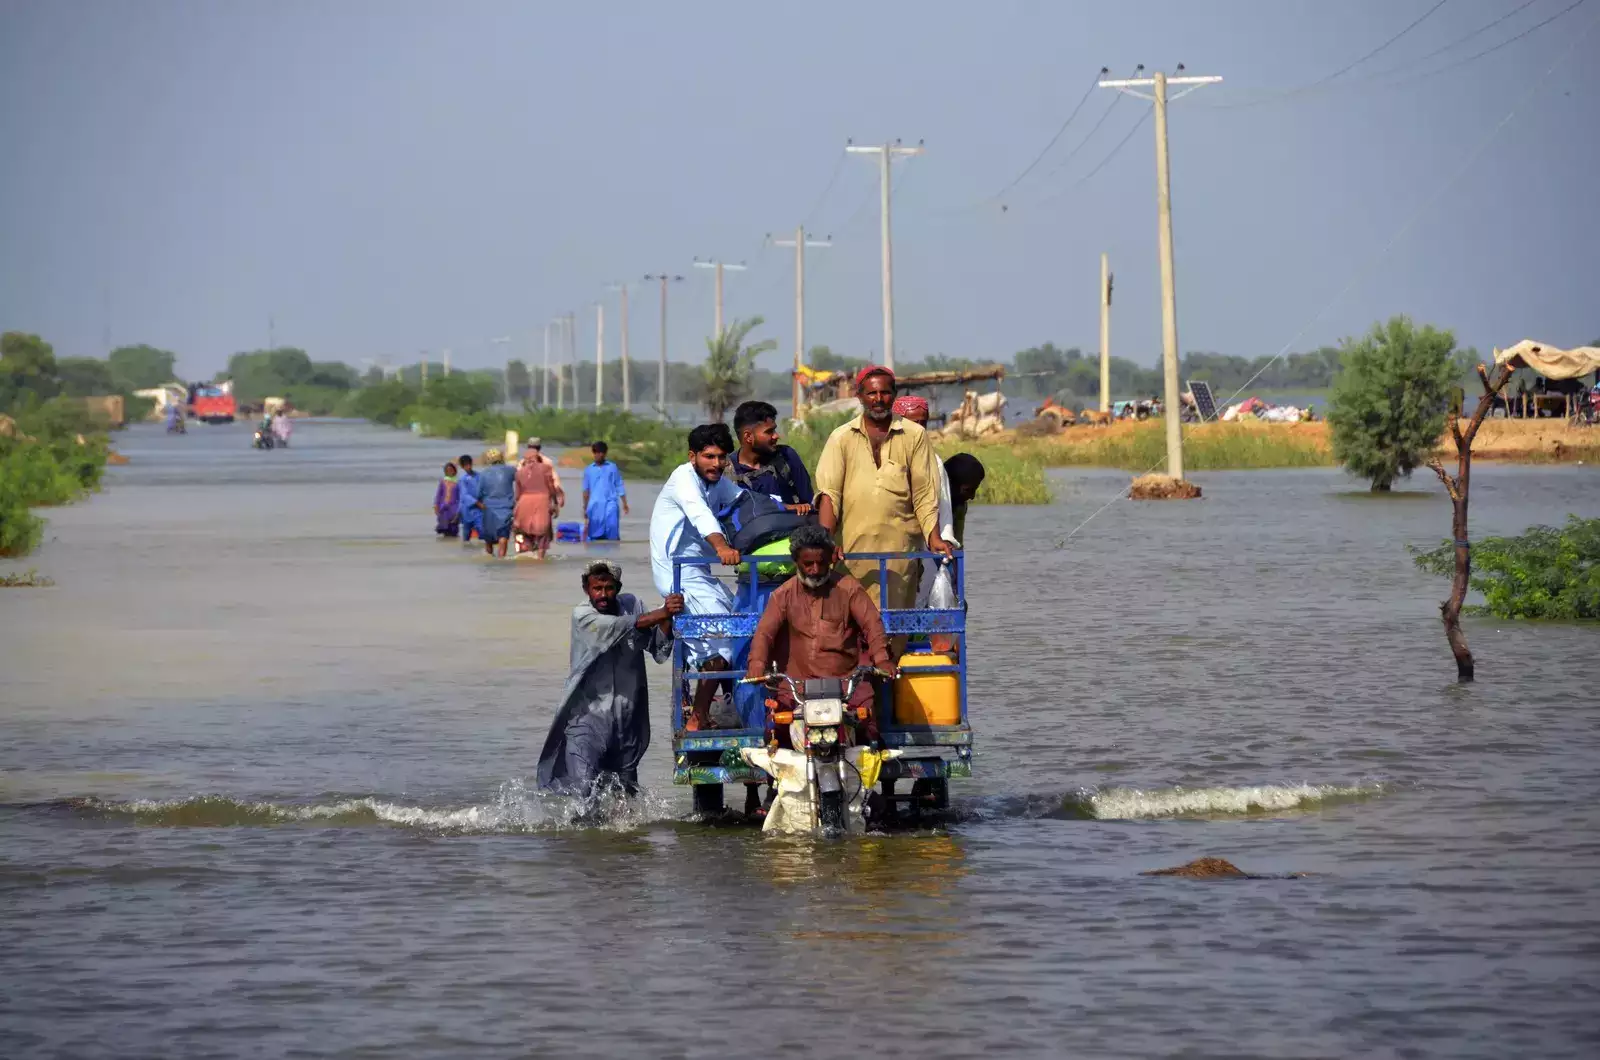 Pakistan devastating floods, a harbinger of what is to come